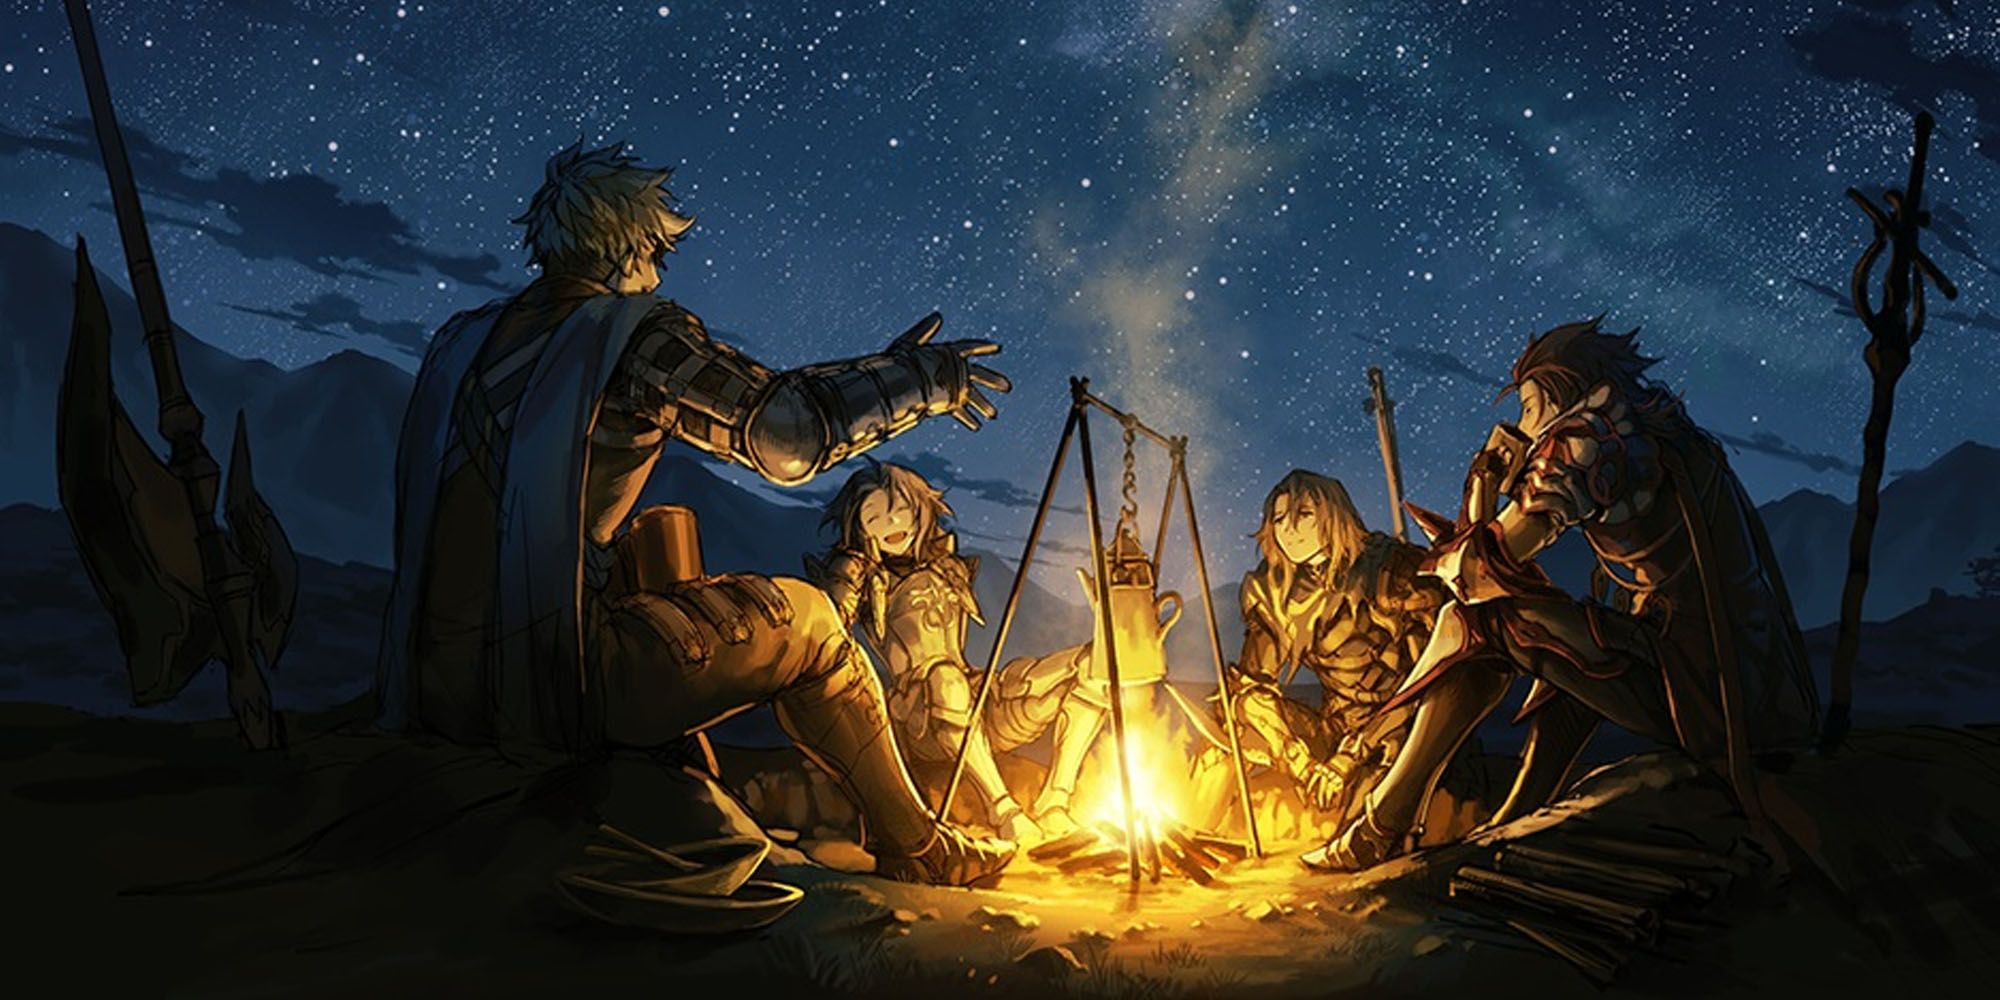 A DnD party camping at night